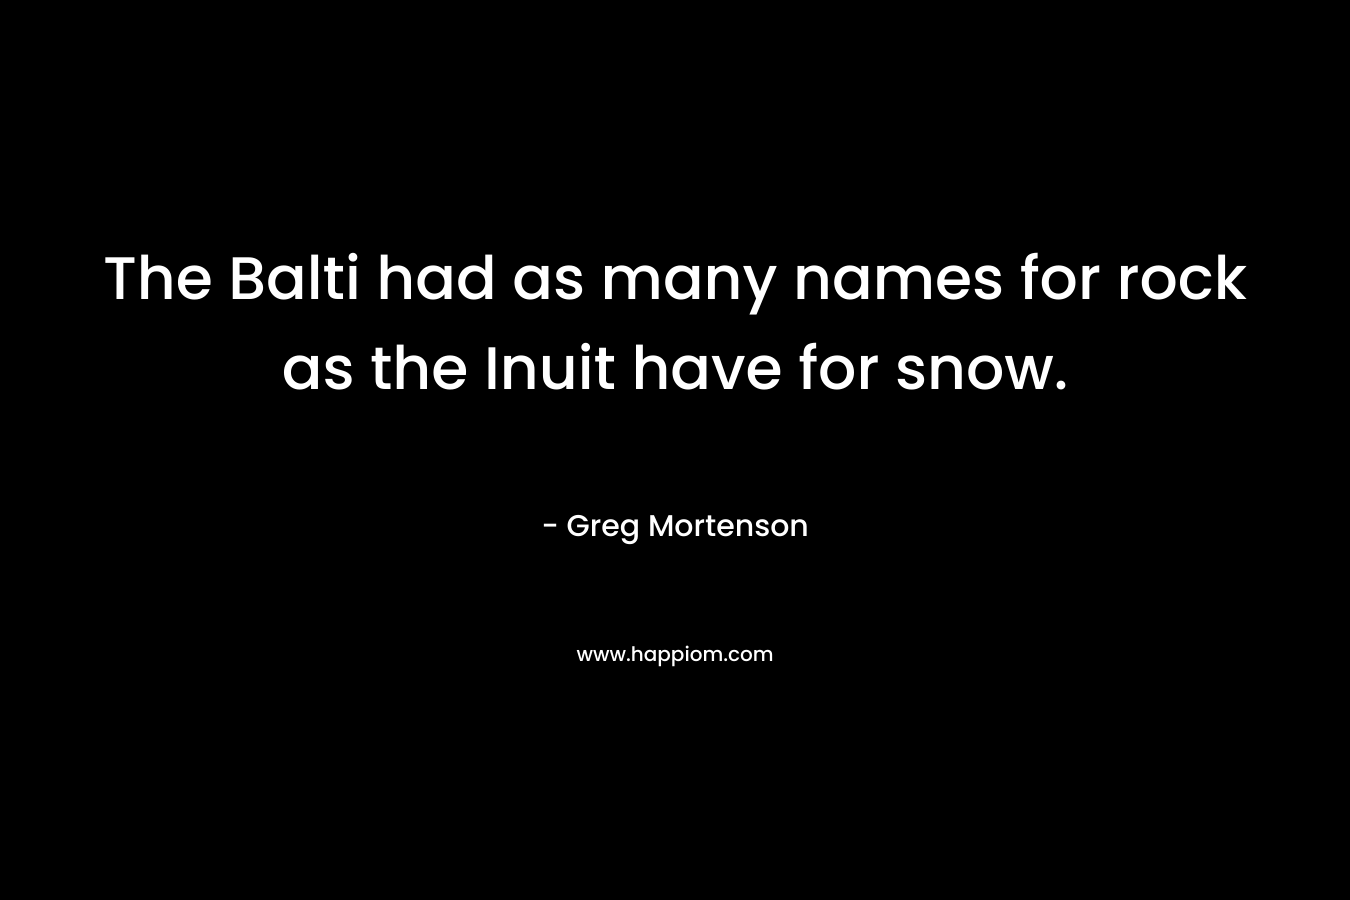 The Balti had as many names for rock as the Inuit have for snow.